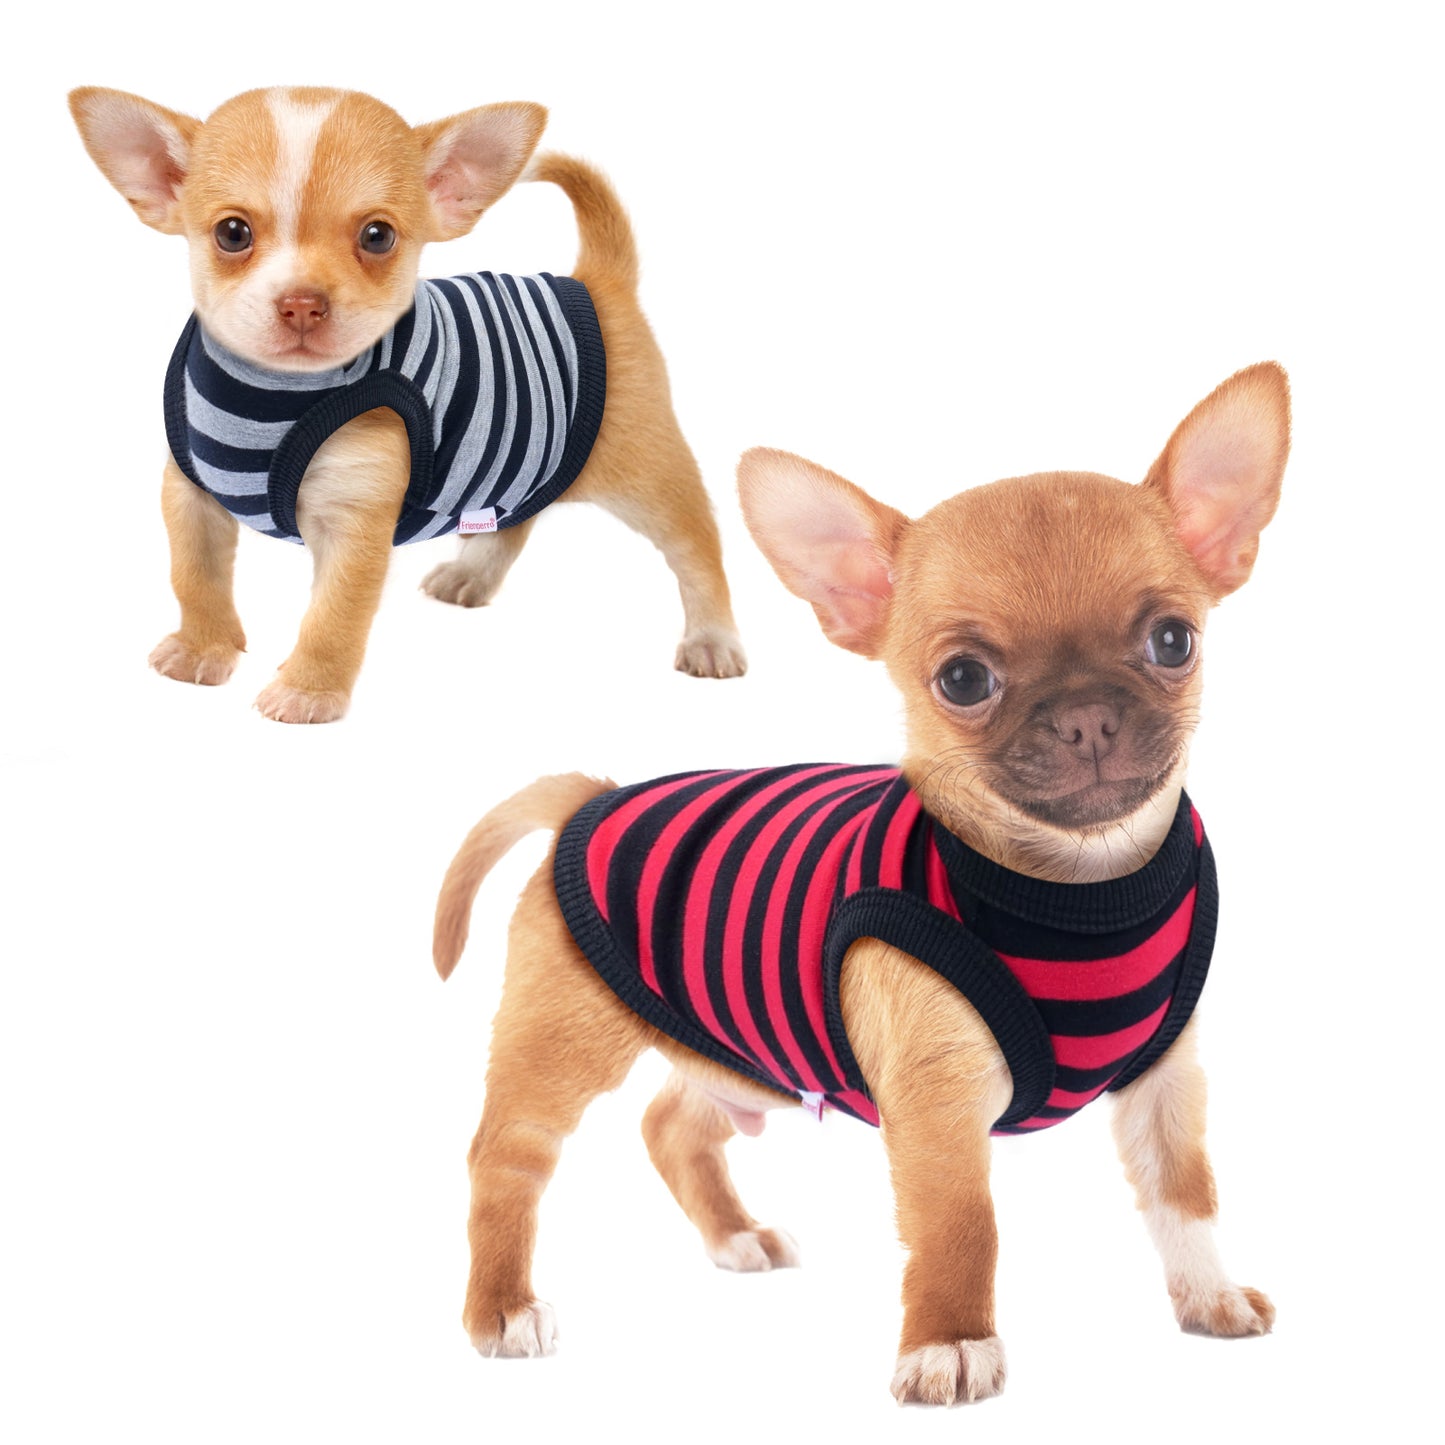 Frienperro 2-Pack Striped Dog Clothes